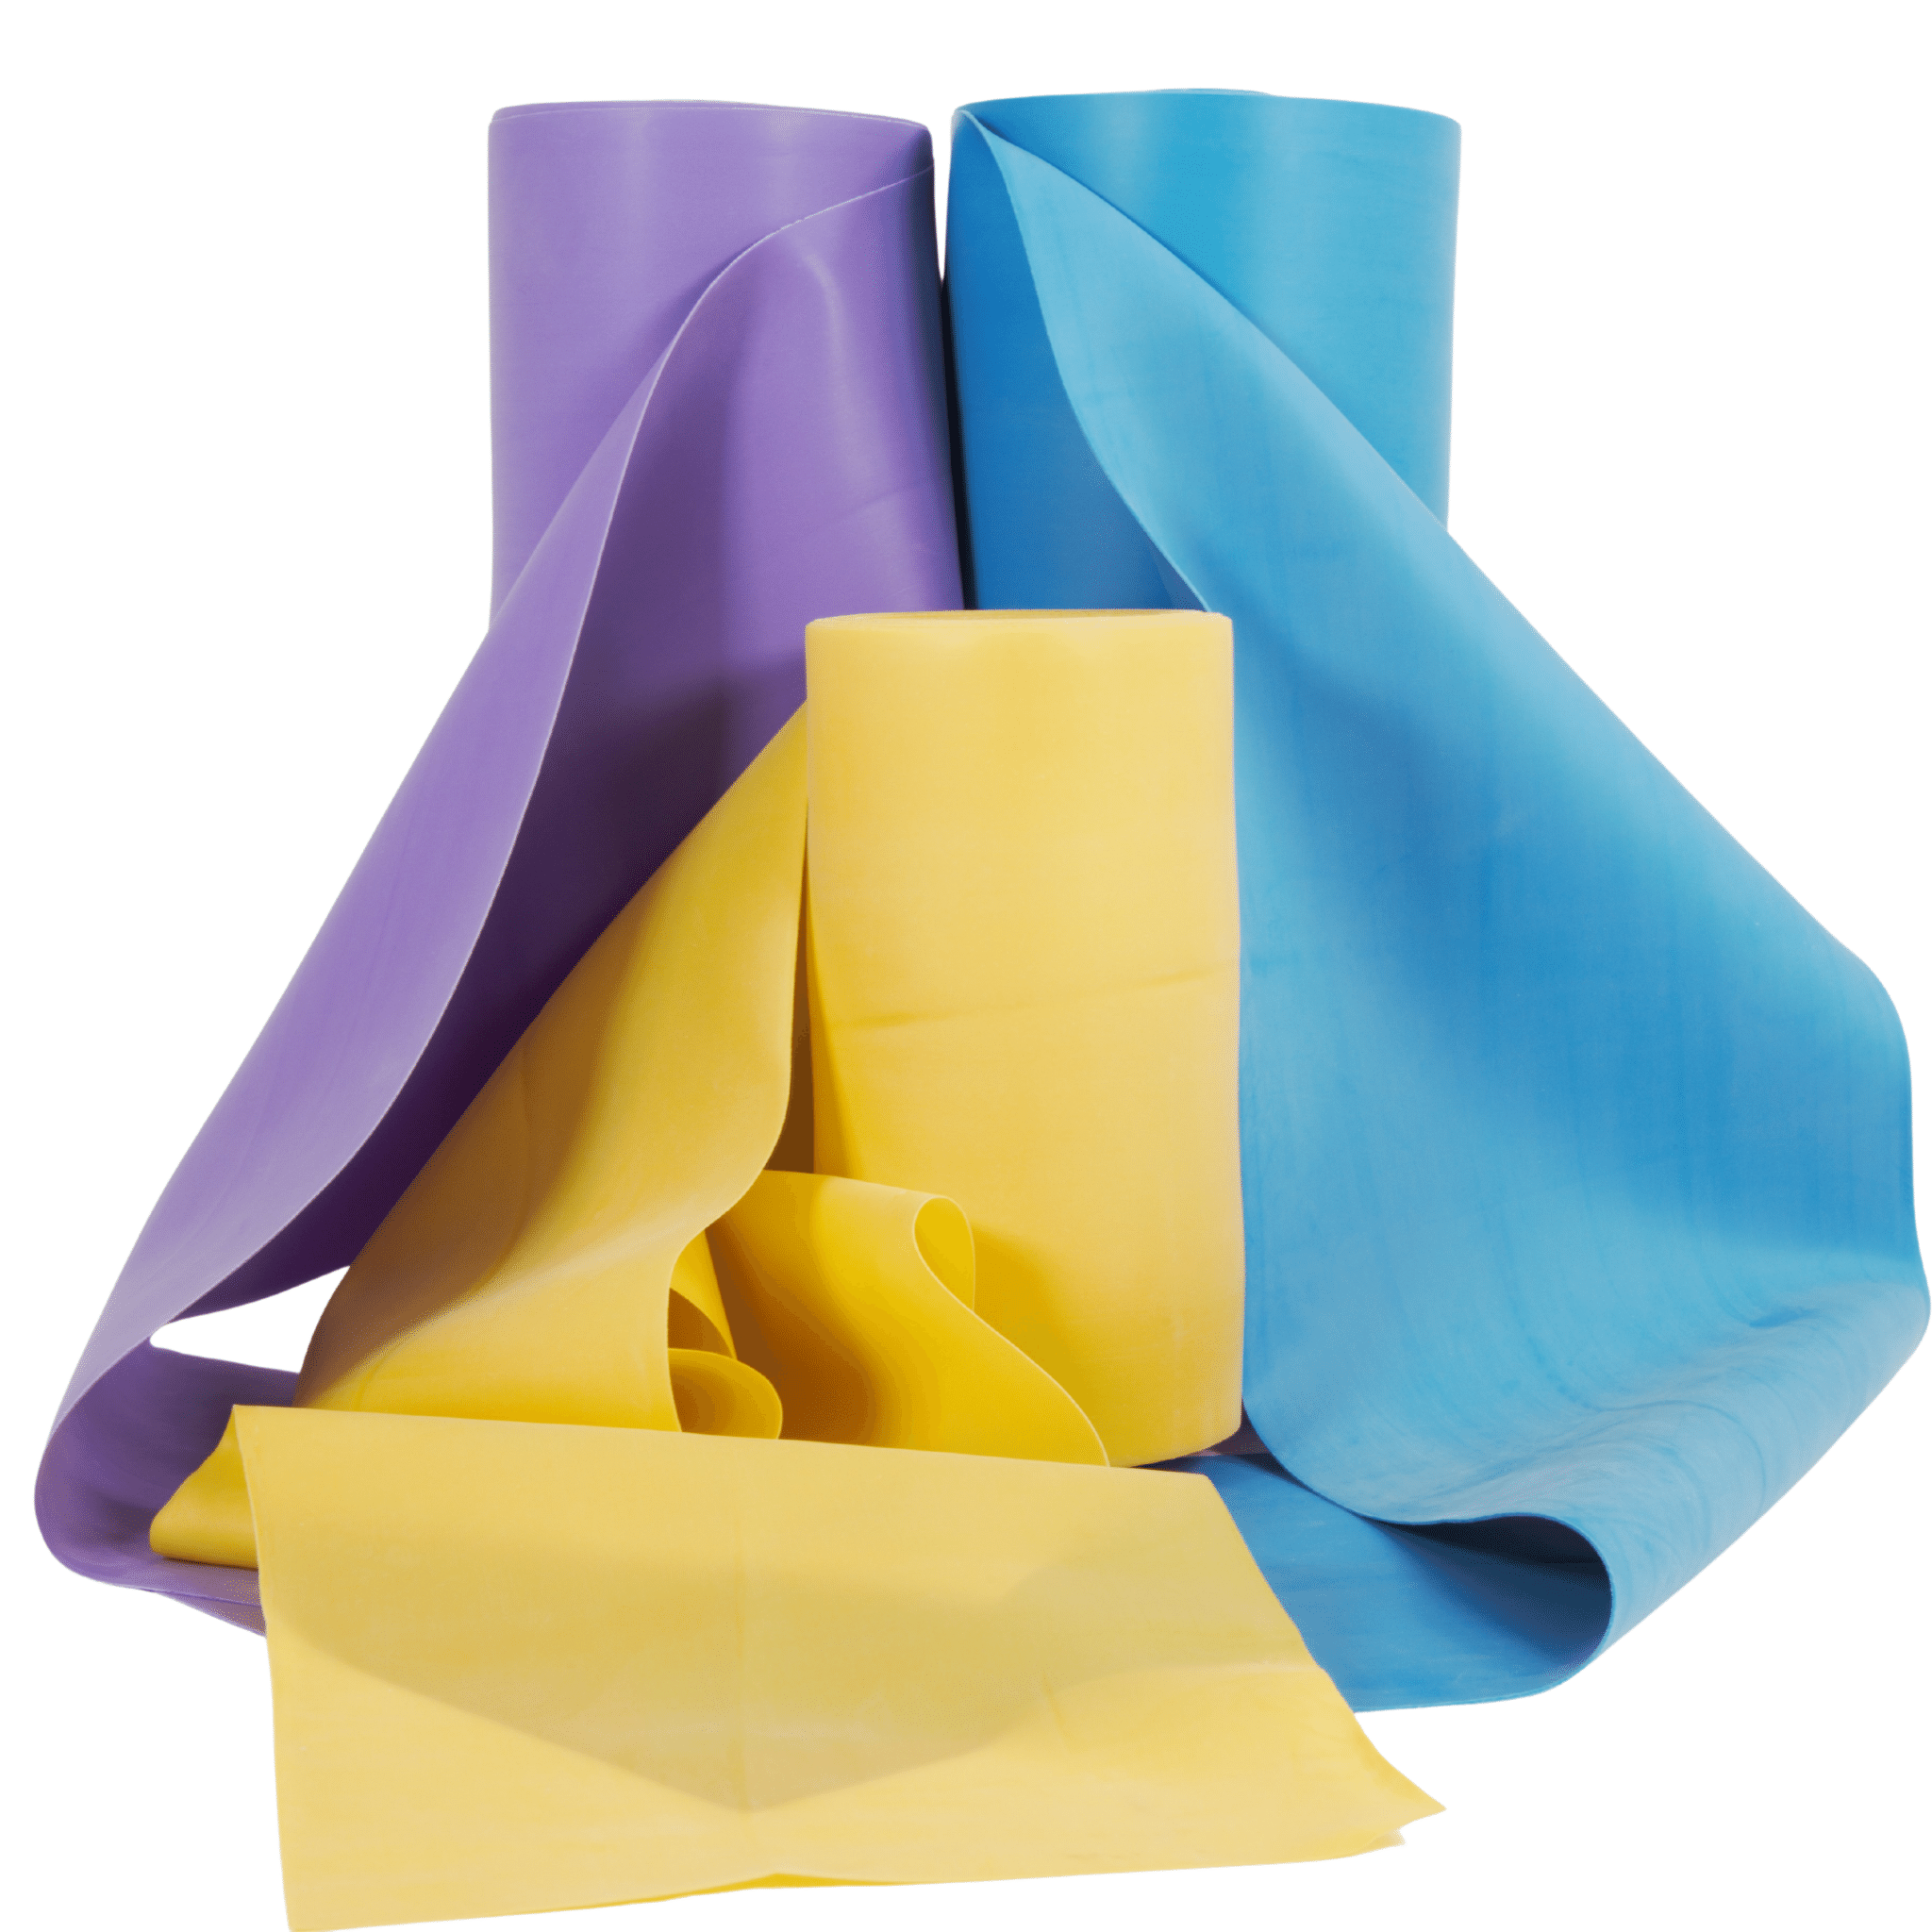 Latex Resistance band Bulk Roll | similar to dyna band | purple (strong), blue (medium), yellow (soft)